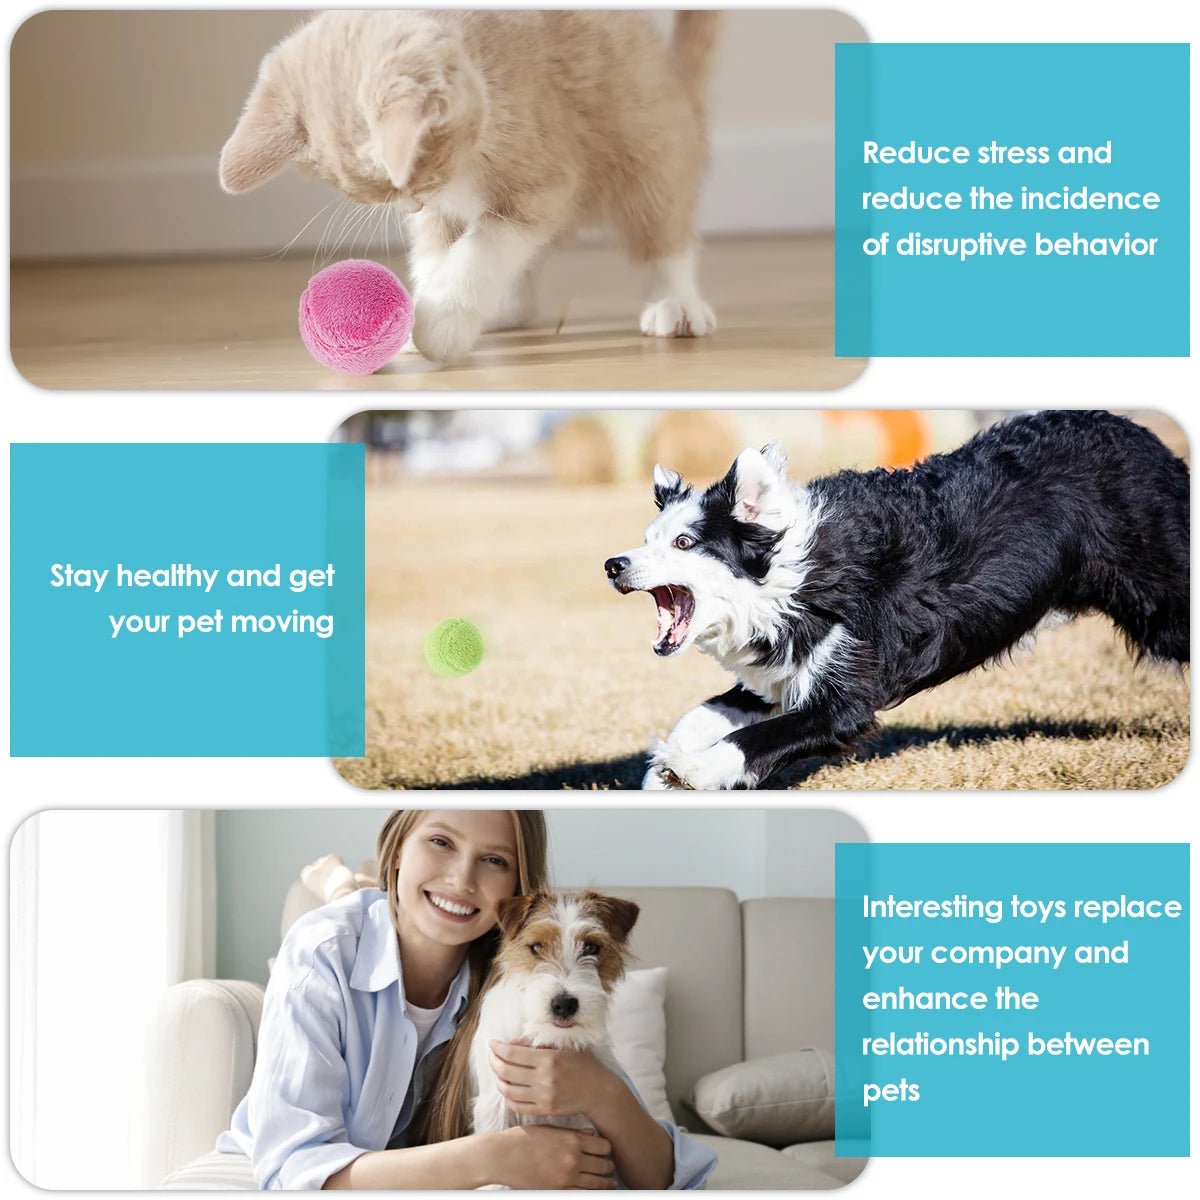 Introducing the perfect playmate for your pup - our Automatic Dog Toy! This innovative dog ball provides